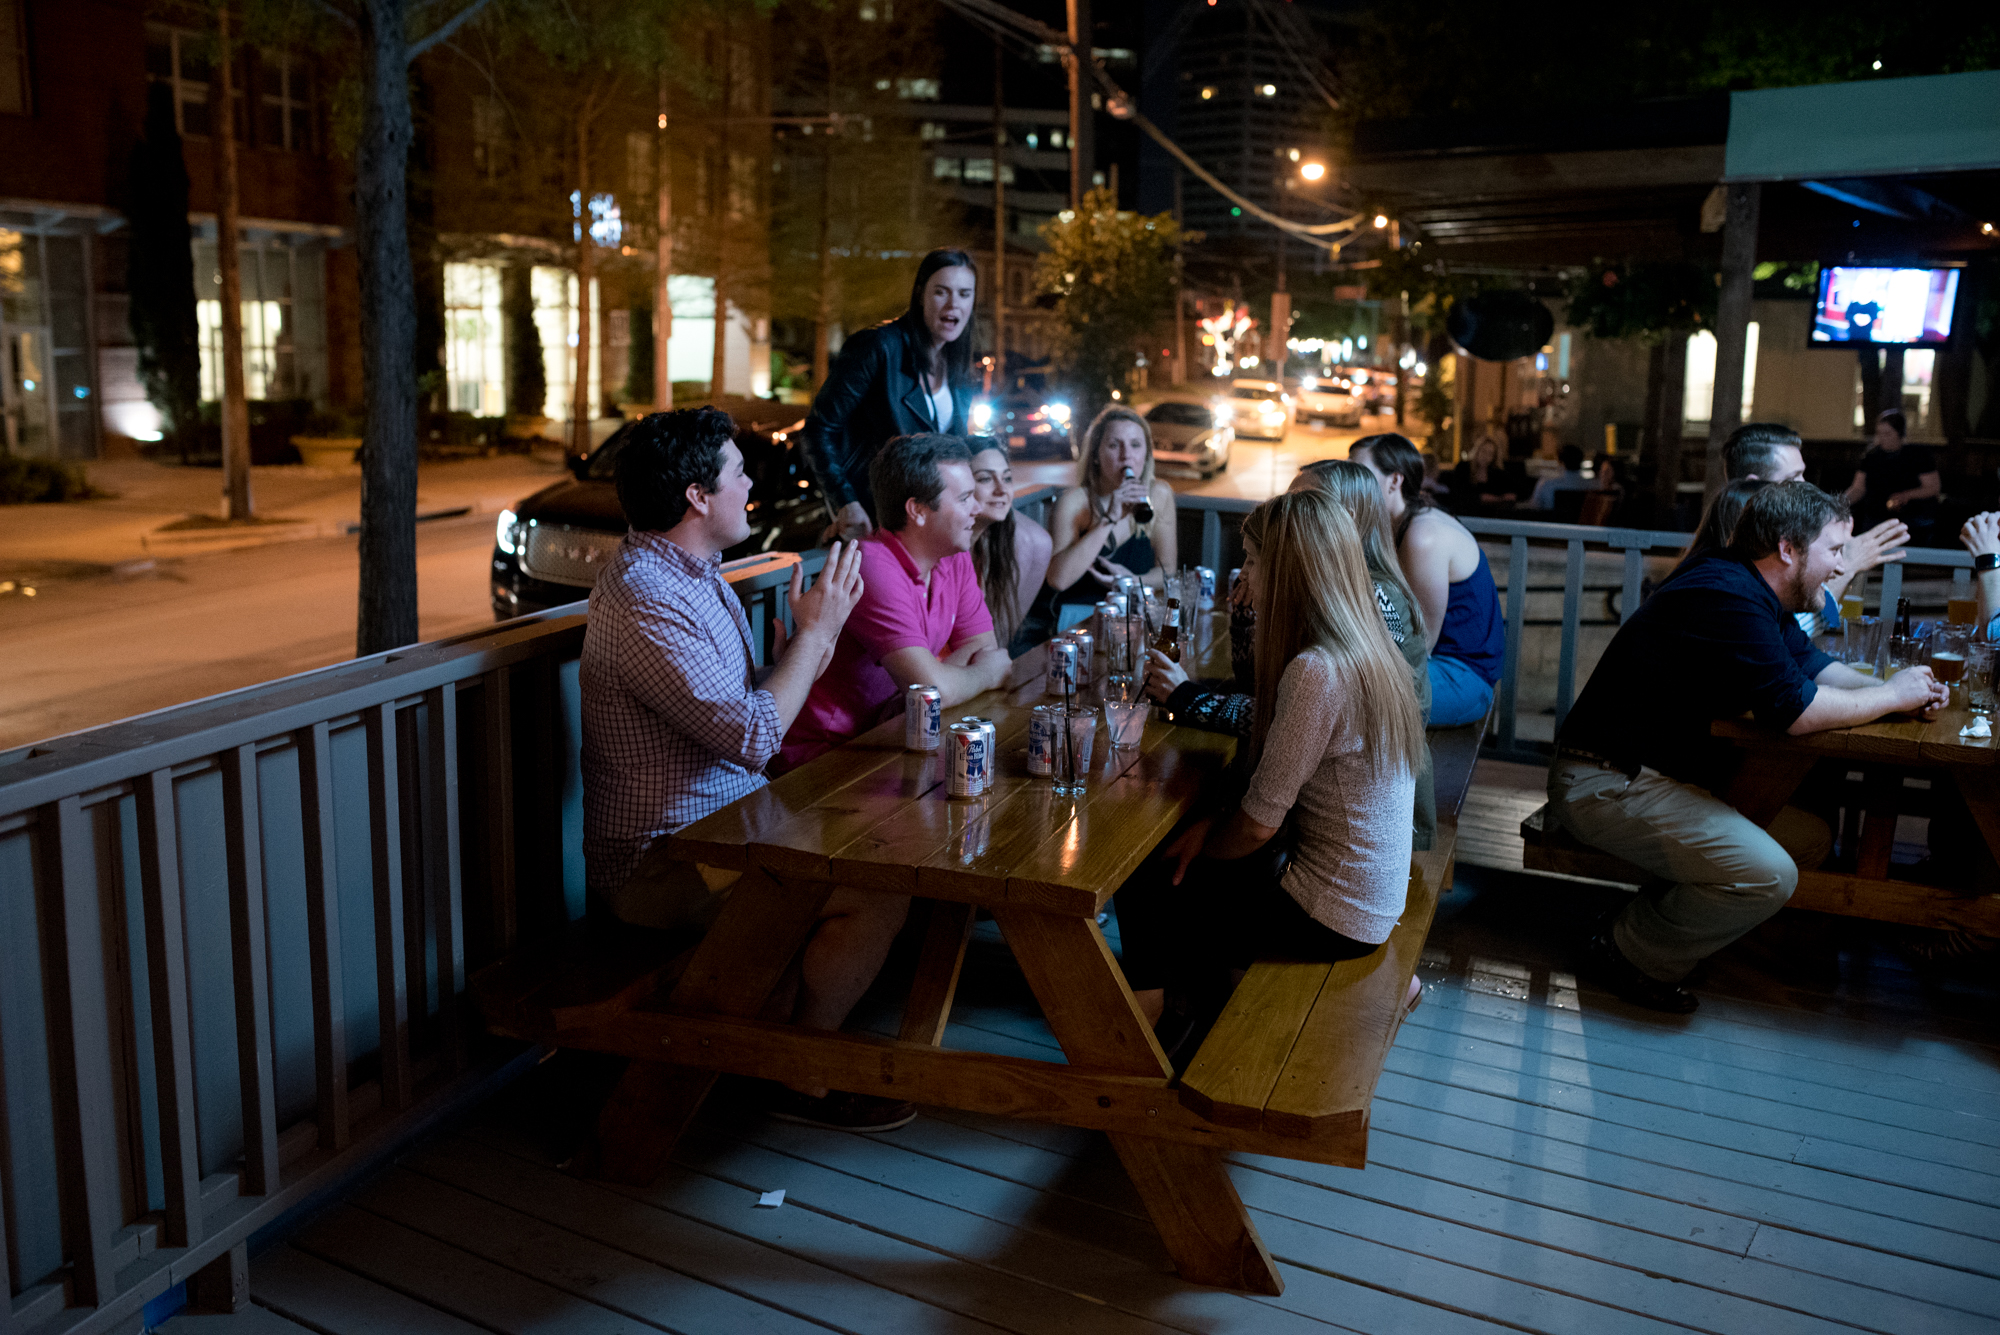 The bar features a light-strewn patio–perfect for a warm night.